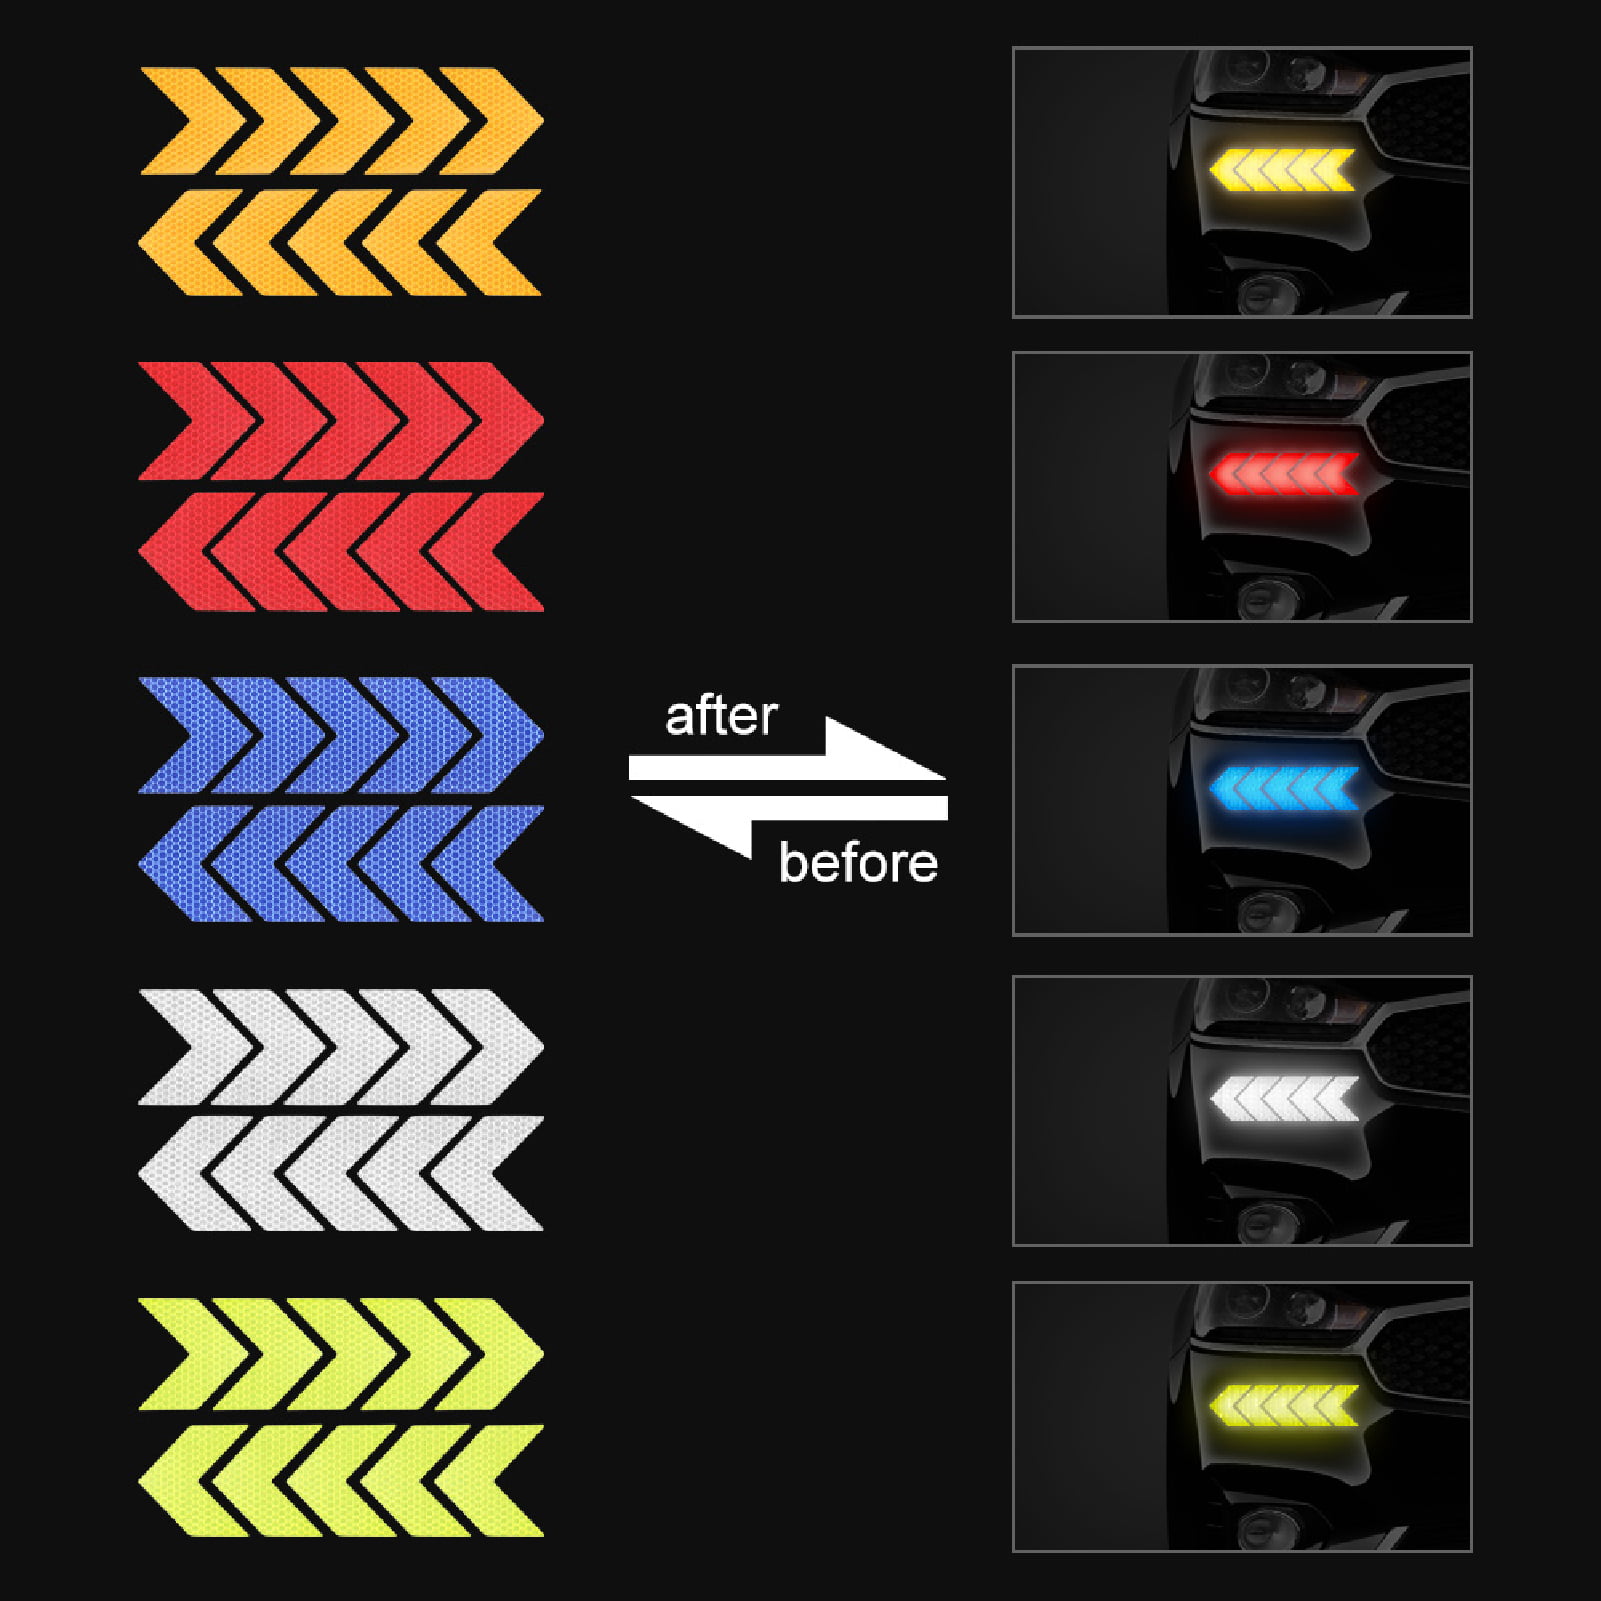 0.4''197'' Car Reflective Strips Stickers for Body Rim, Funny DIY Warning Safety Decoration Strip Decals, Self-Adhesive Night Visibility Reflective Ta